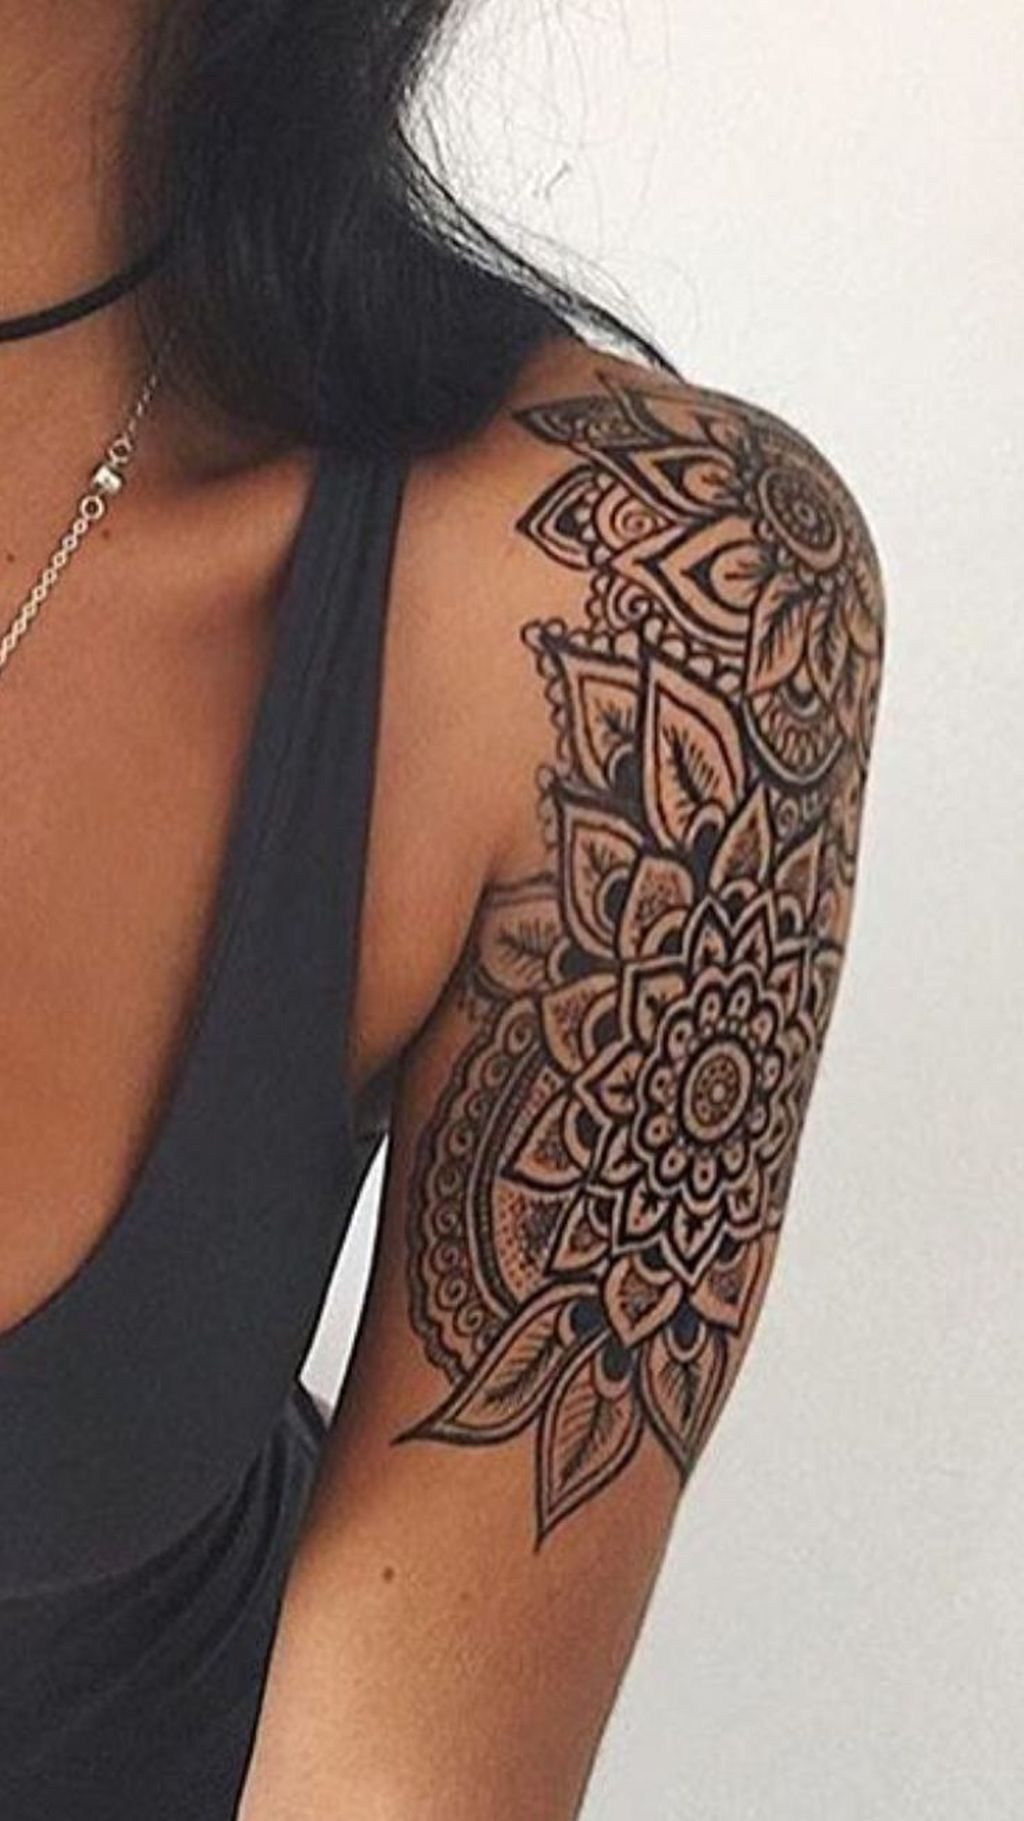 Cute Henna Lace Arm Tattoo Ideas You Should Try 17 Tattooideasarm pertaining to dimensions 1024 X 1821